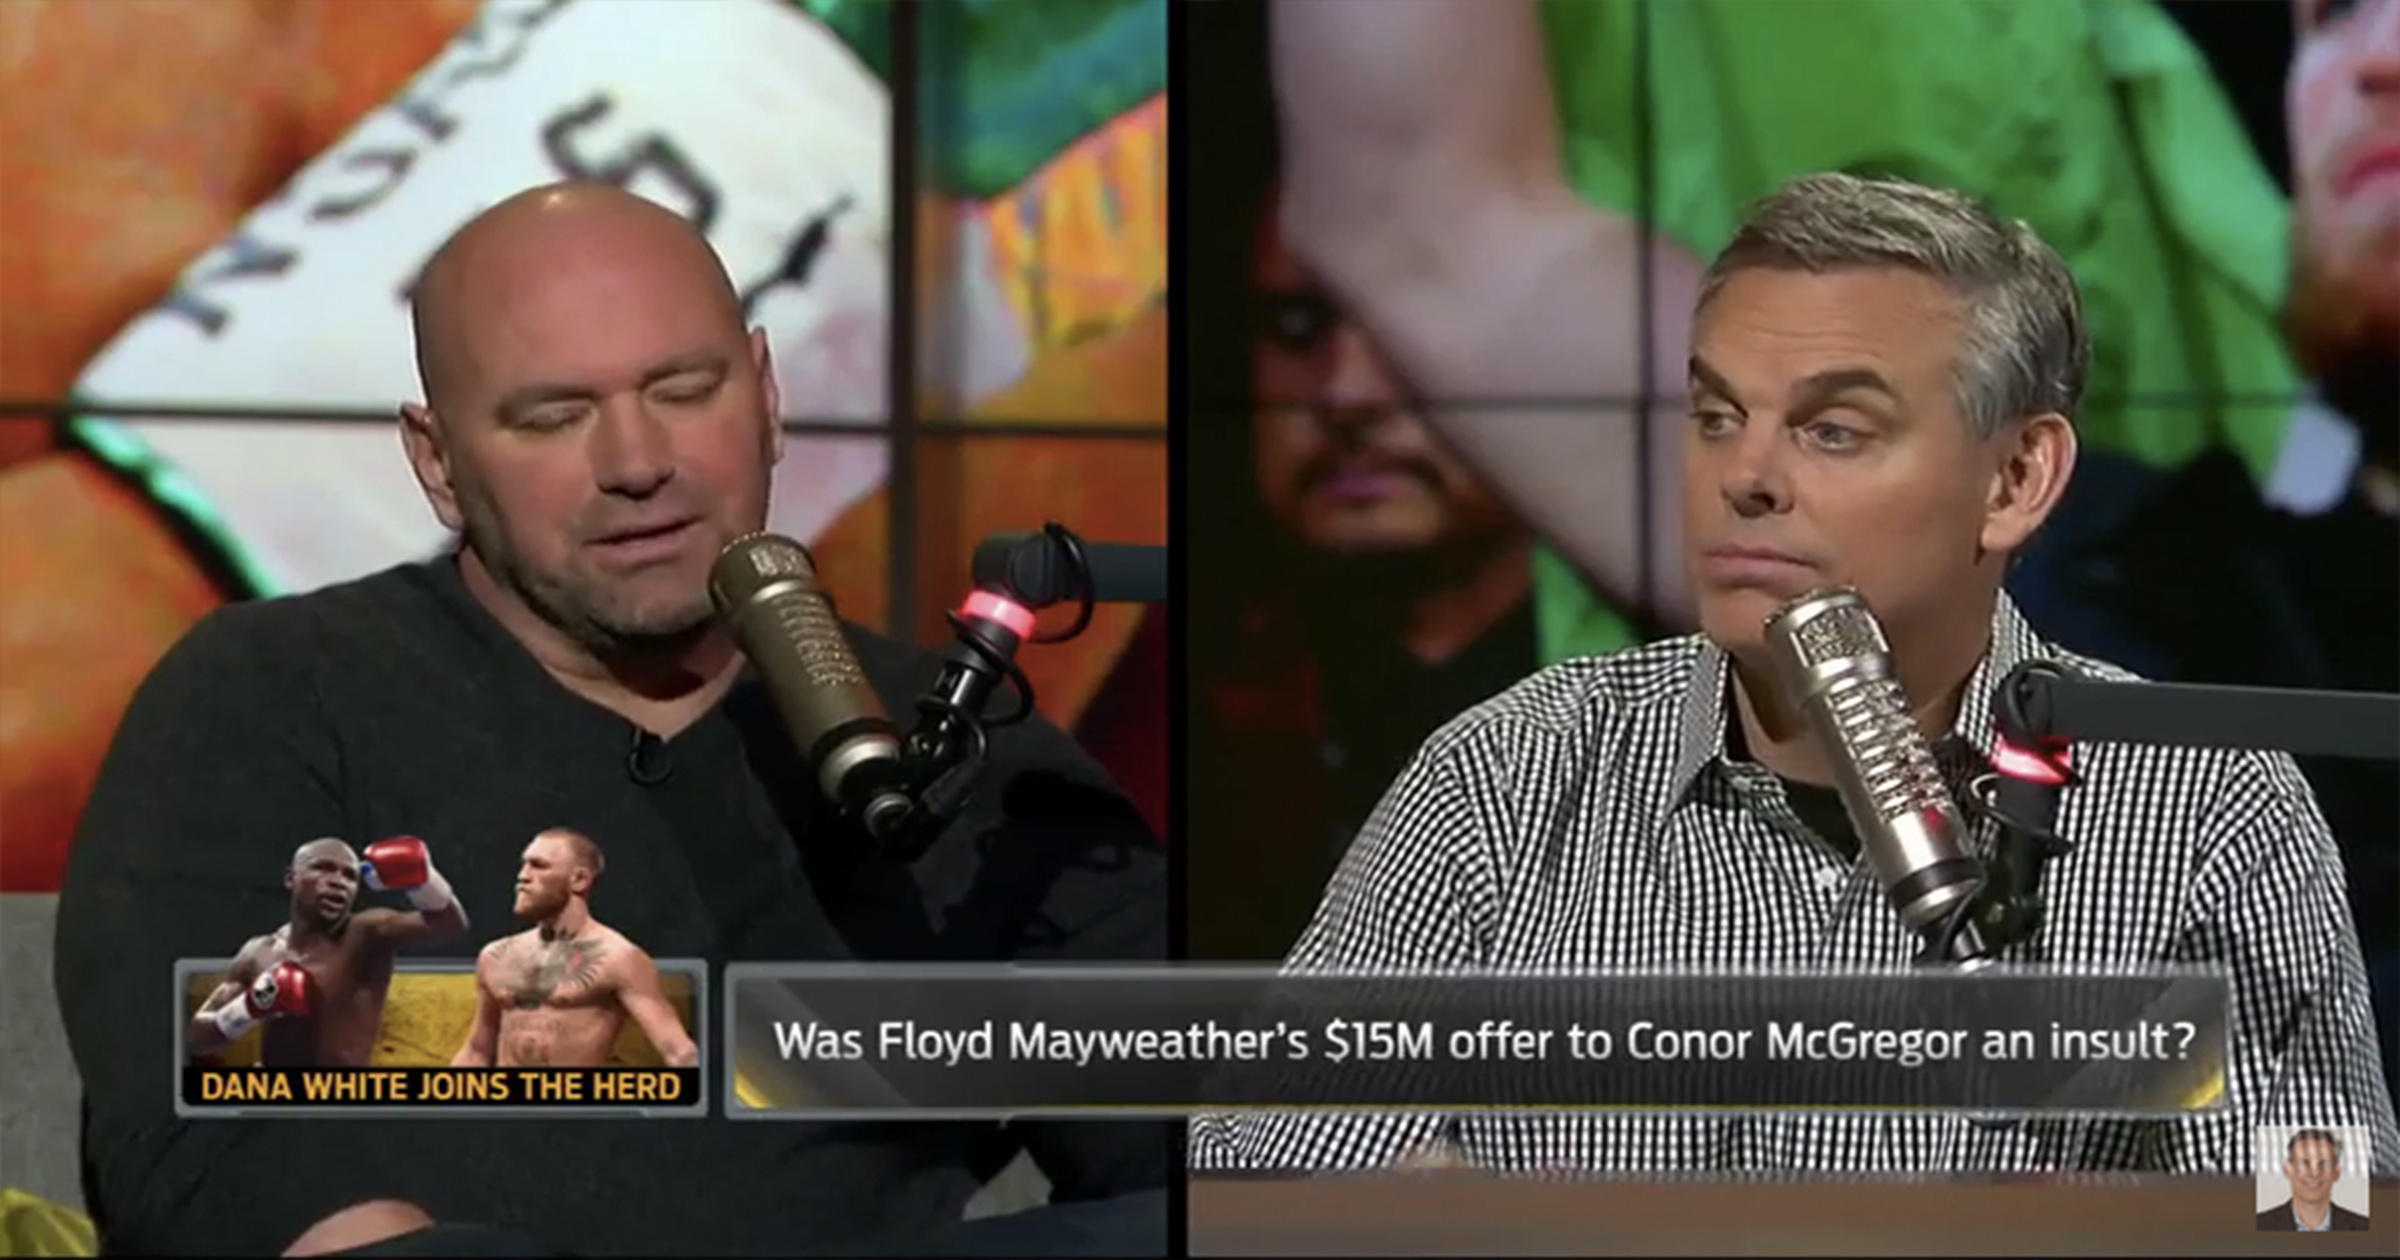 WATCH: Dana White confirms The UFC's MASSIVE offer to Conor McGregor & Floyd Mayweather.